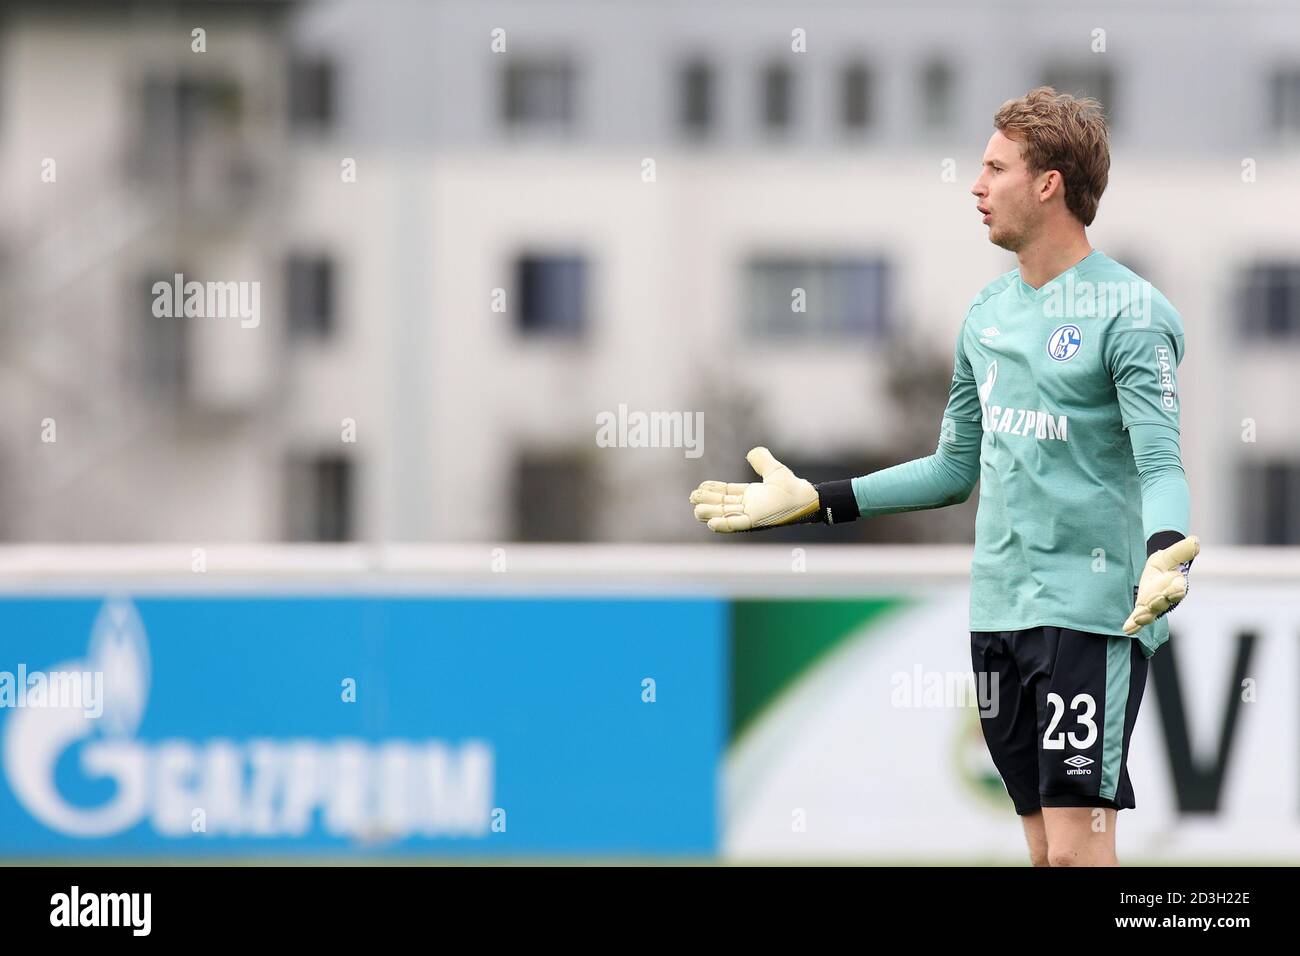 08 October 2020, North Rhine-Westphalia, Gelsenkirchen: Football: Test matches, FC Schalke 04 - SC Paderborn in the Parkstadion. Schalke's goalkeeper Frederik Rönnow gives instructions to his teammates. Photo: Guido Kirchner/dpa - IMPORTANT NOTE: In accordance with the regulations of the DFL Deutsche Fußball Liga and the DFB Deutscher Fußball-Bund, it is prohibited to exploit or have exploited in the stadium and/or from the game taken photographs in the form of sequence images and/or video-like photo series. Stock Photo